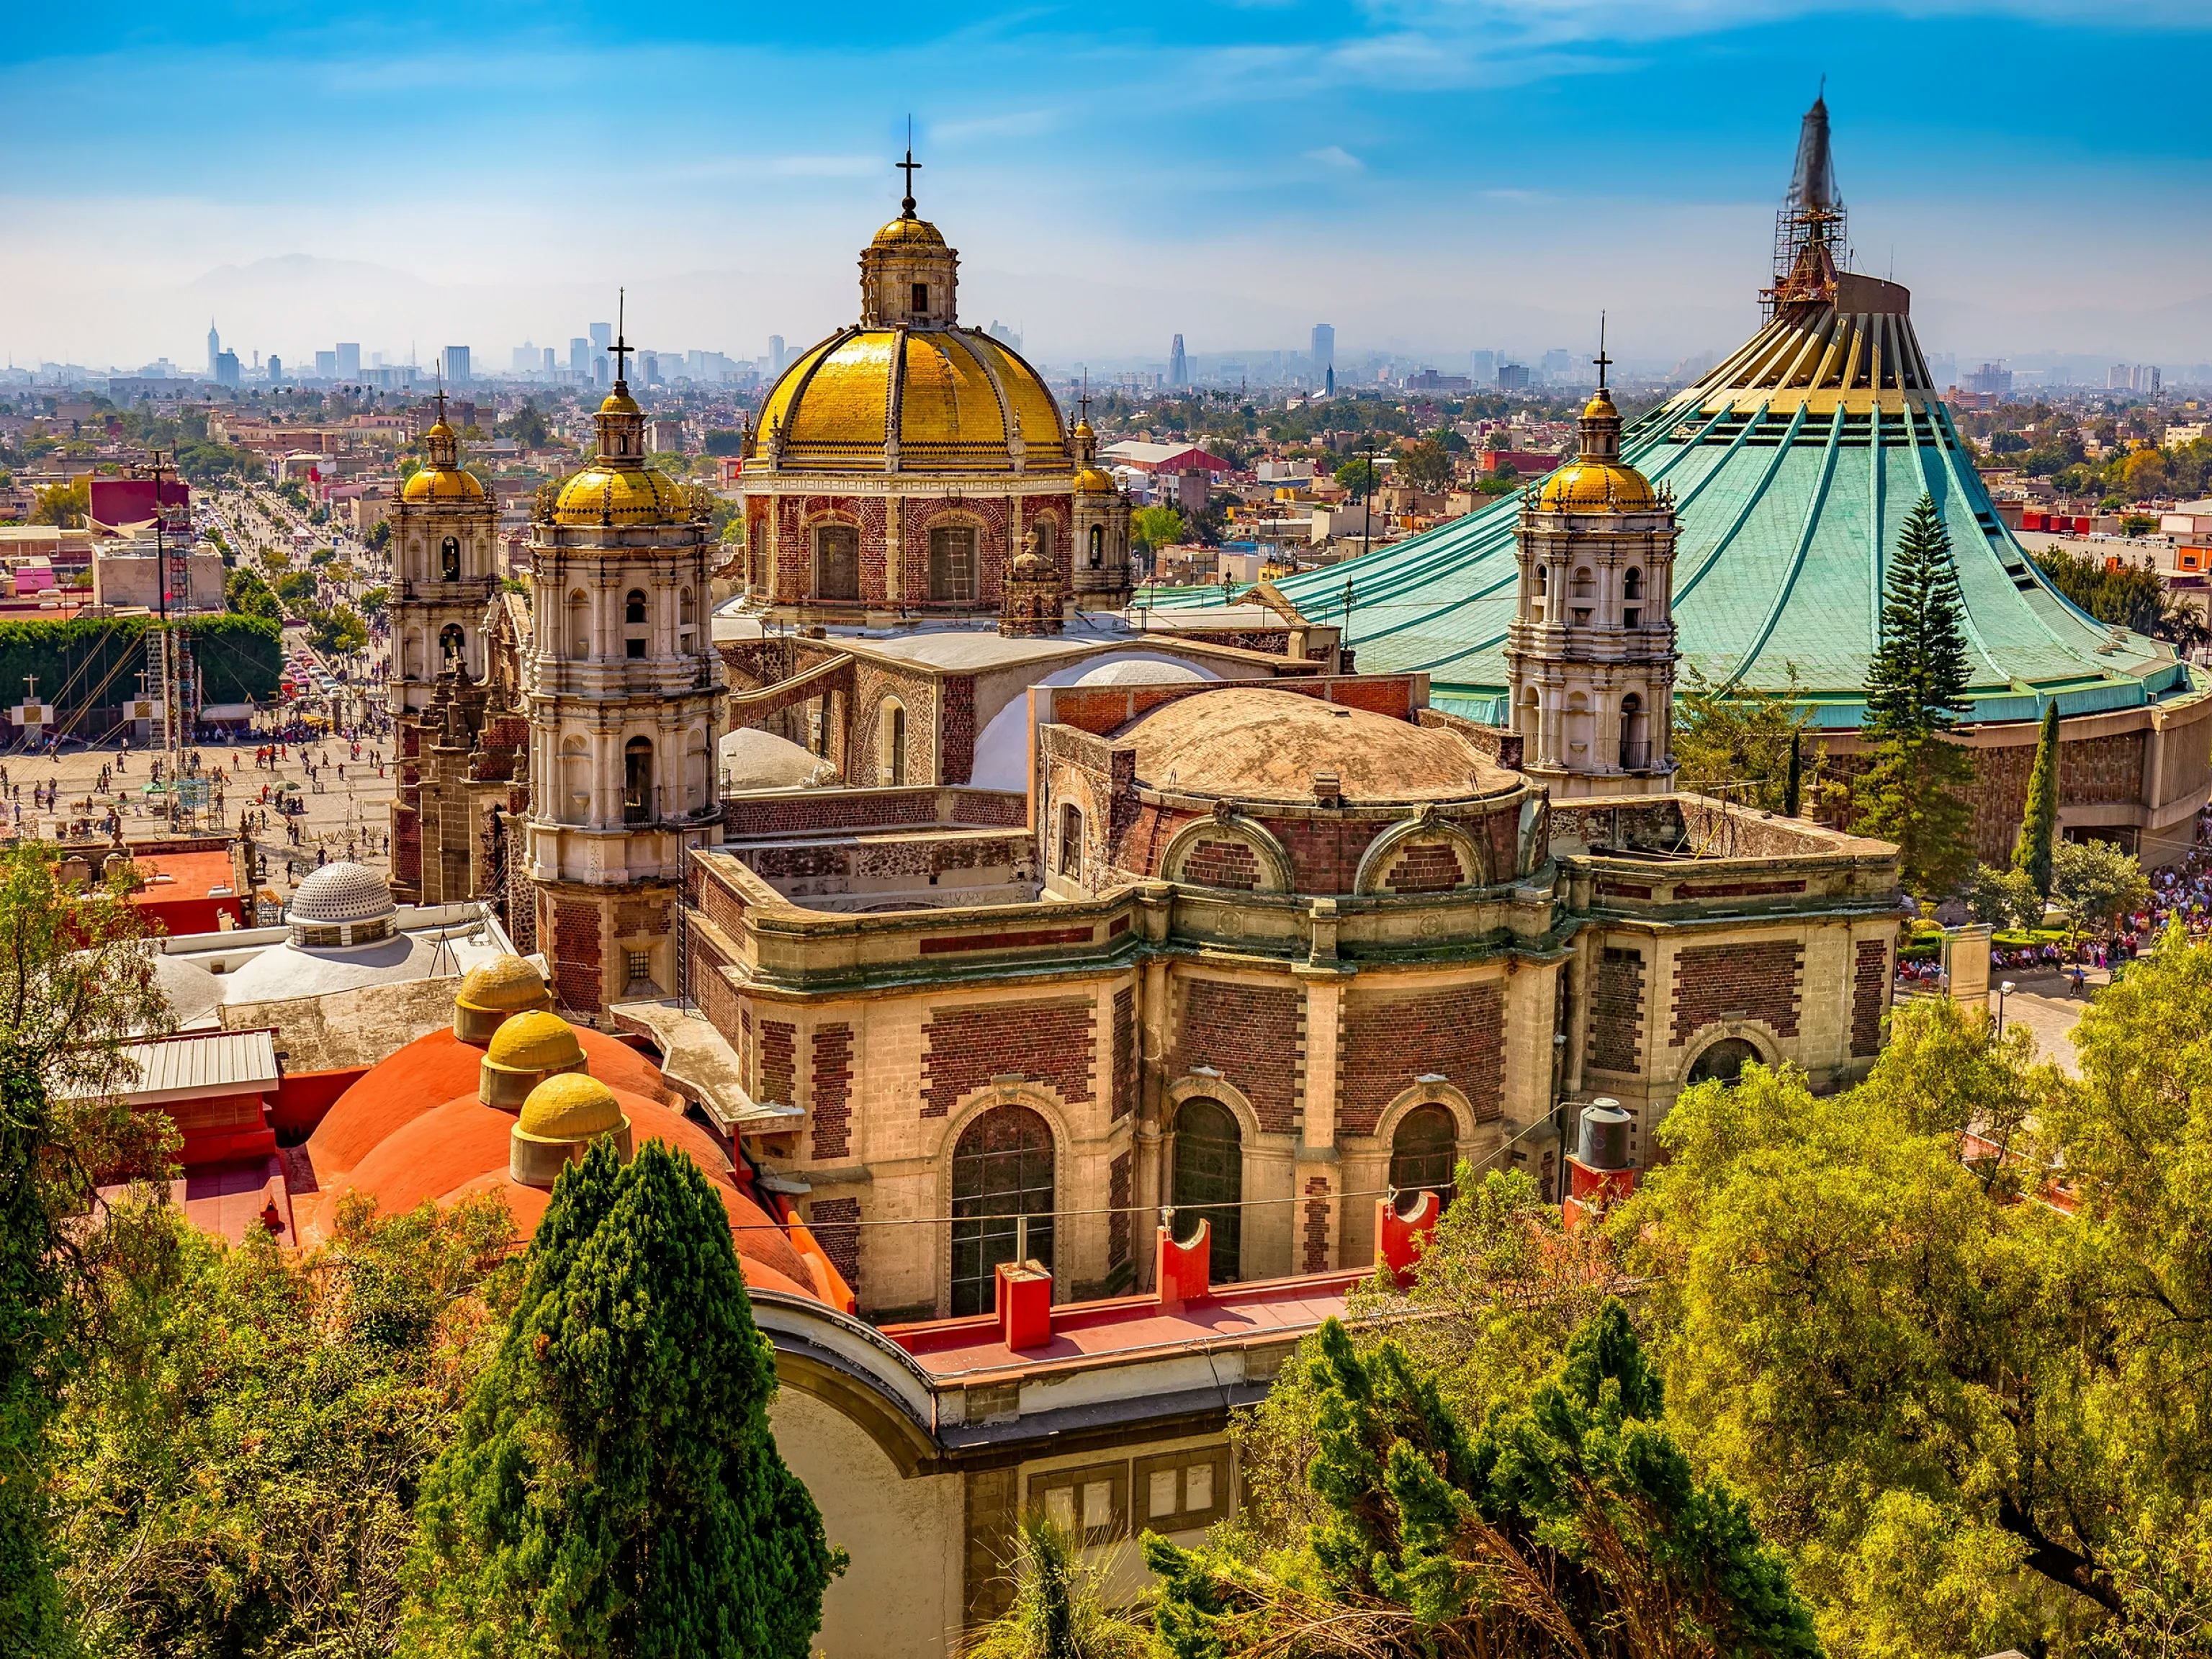 Mexico City from above